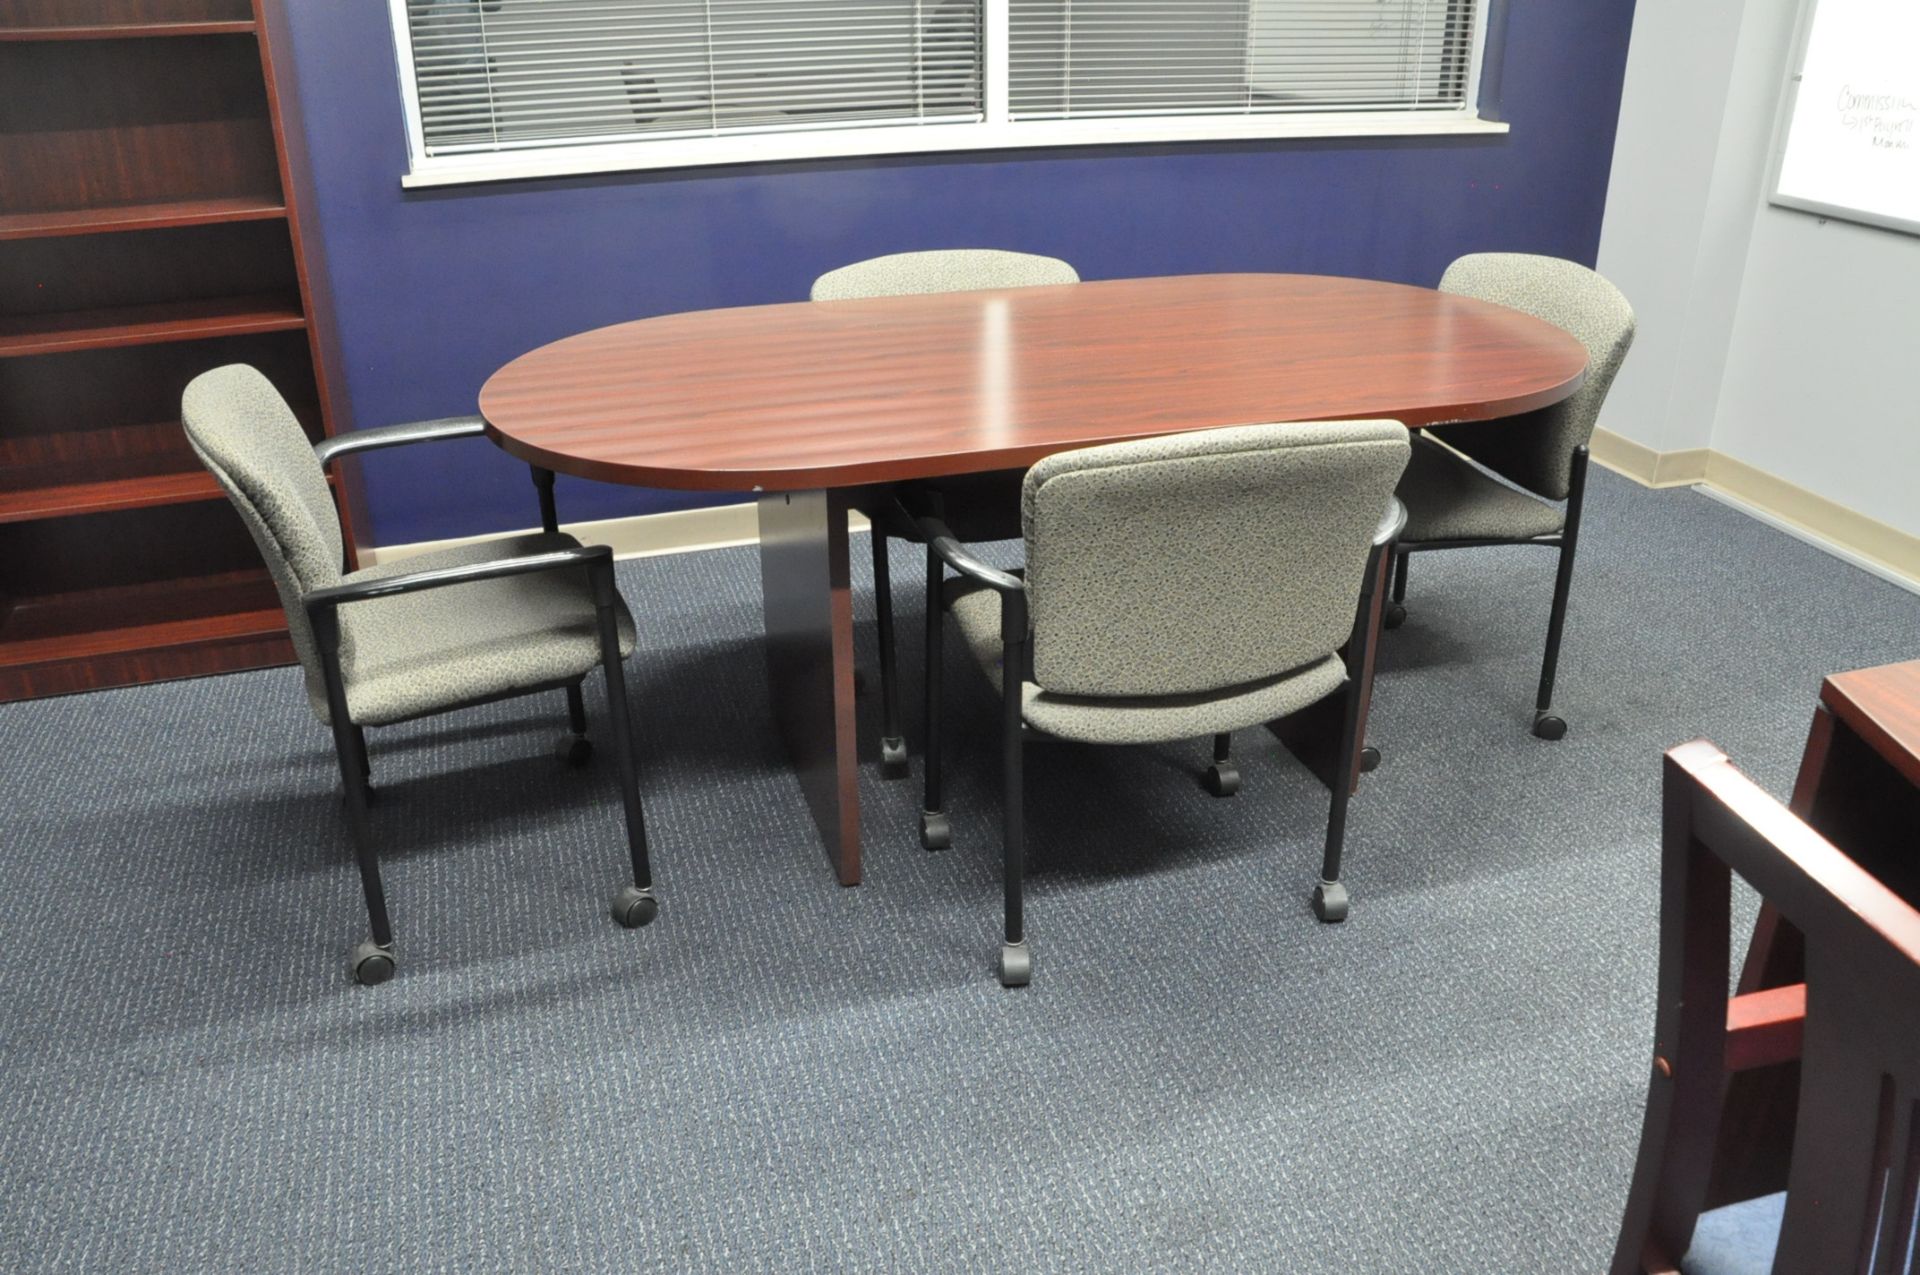 Lot-Desk, (7) Chairs, Table, Bookcase, Lateral File Cabinet and Dry Erase Board in (1) Office - Image 2 of 5